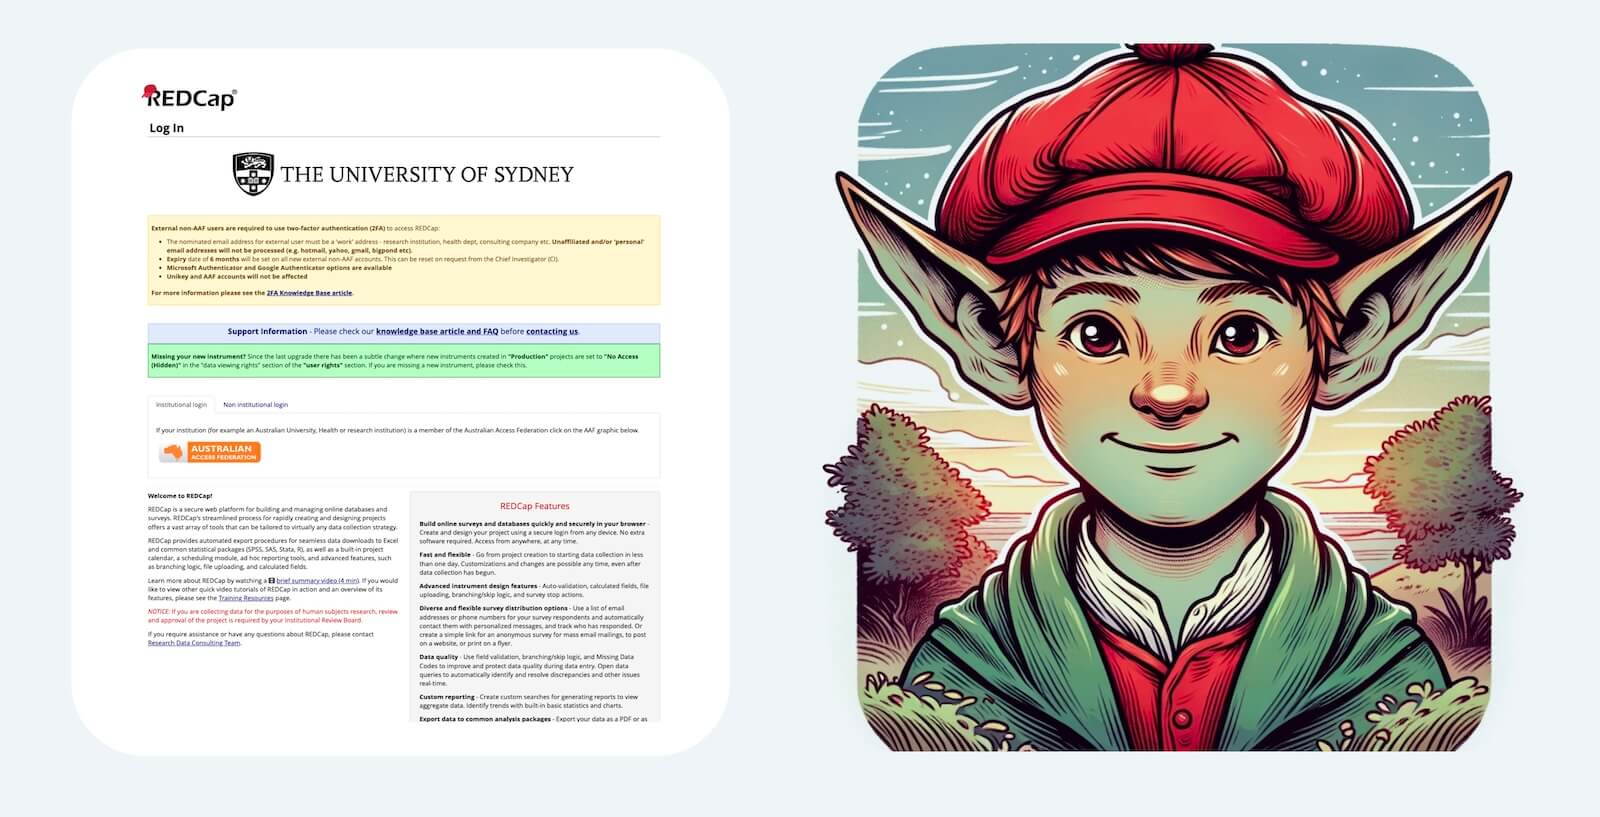 Fig 1. On the left is REDCap, the electronic data capture tool. On the right is a GPT-drawn “redcap”, a goblin-like creature from Scottish folklore. They are not related.